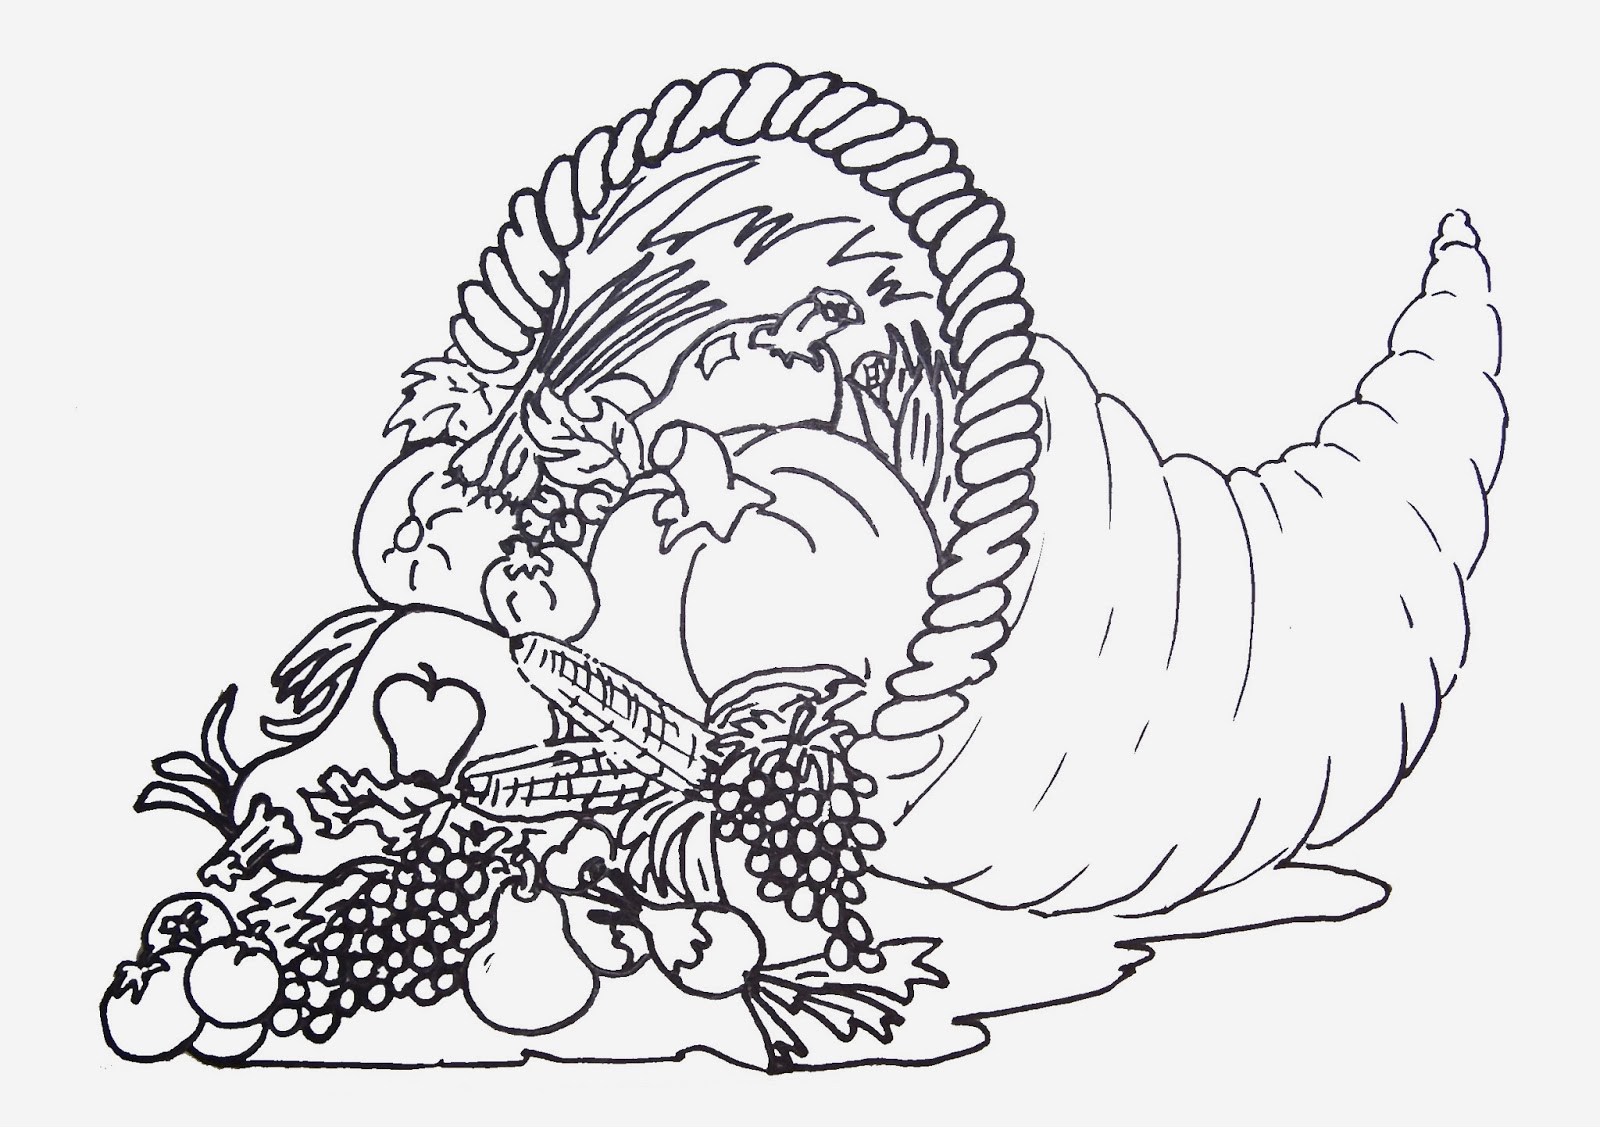 Download Free Printable Coloring Sheets for Thanksgiving ...